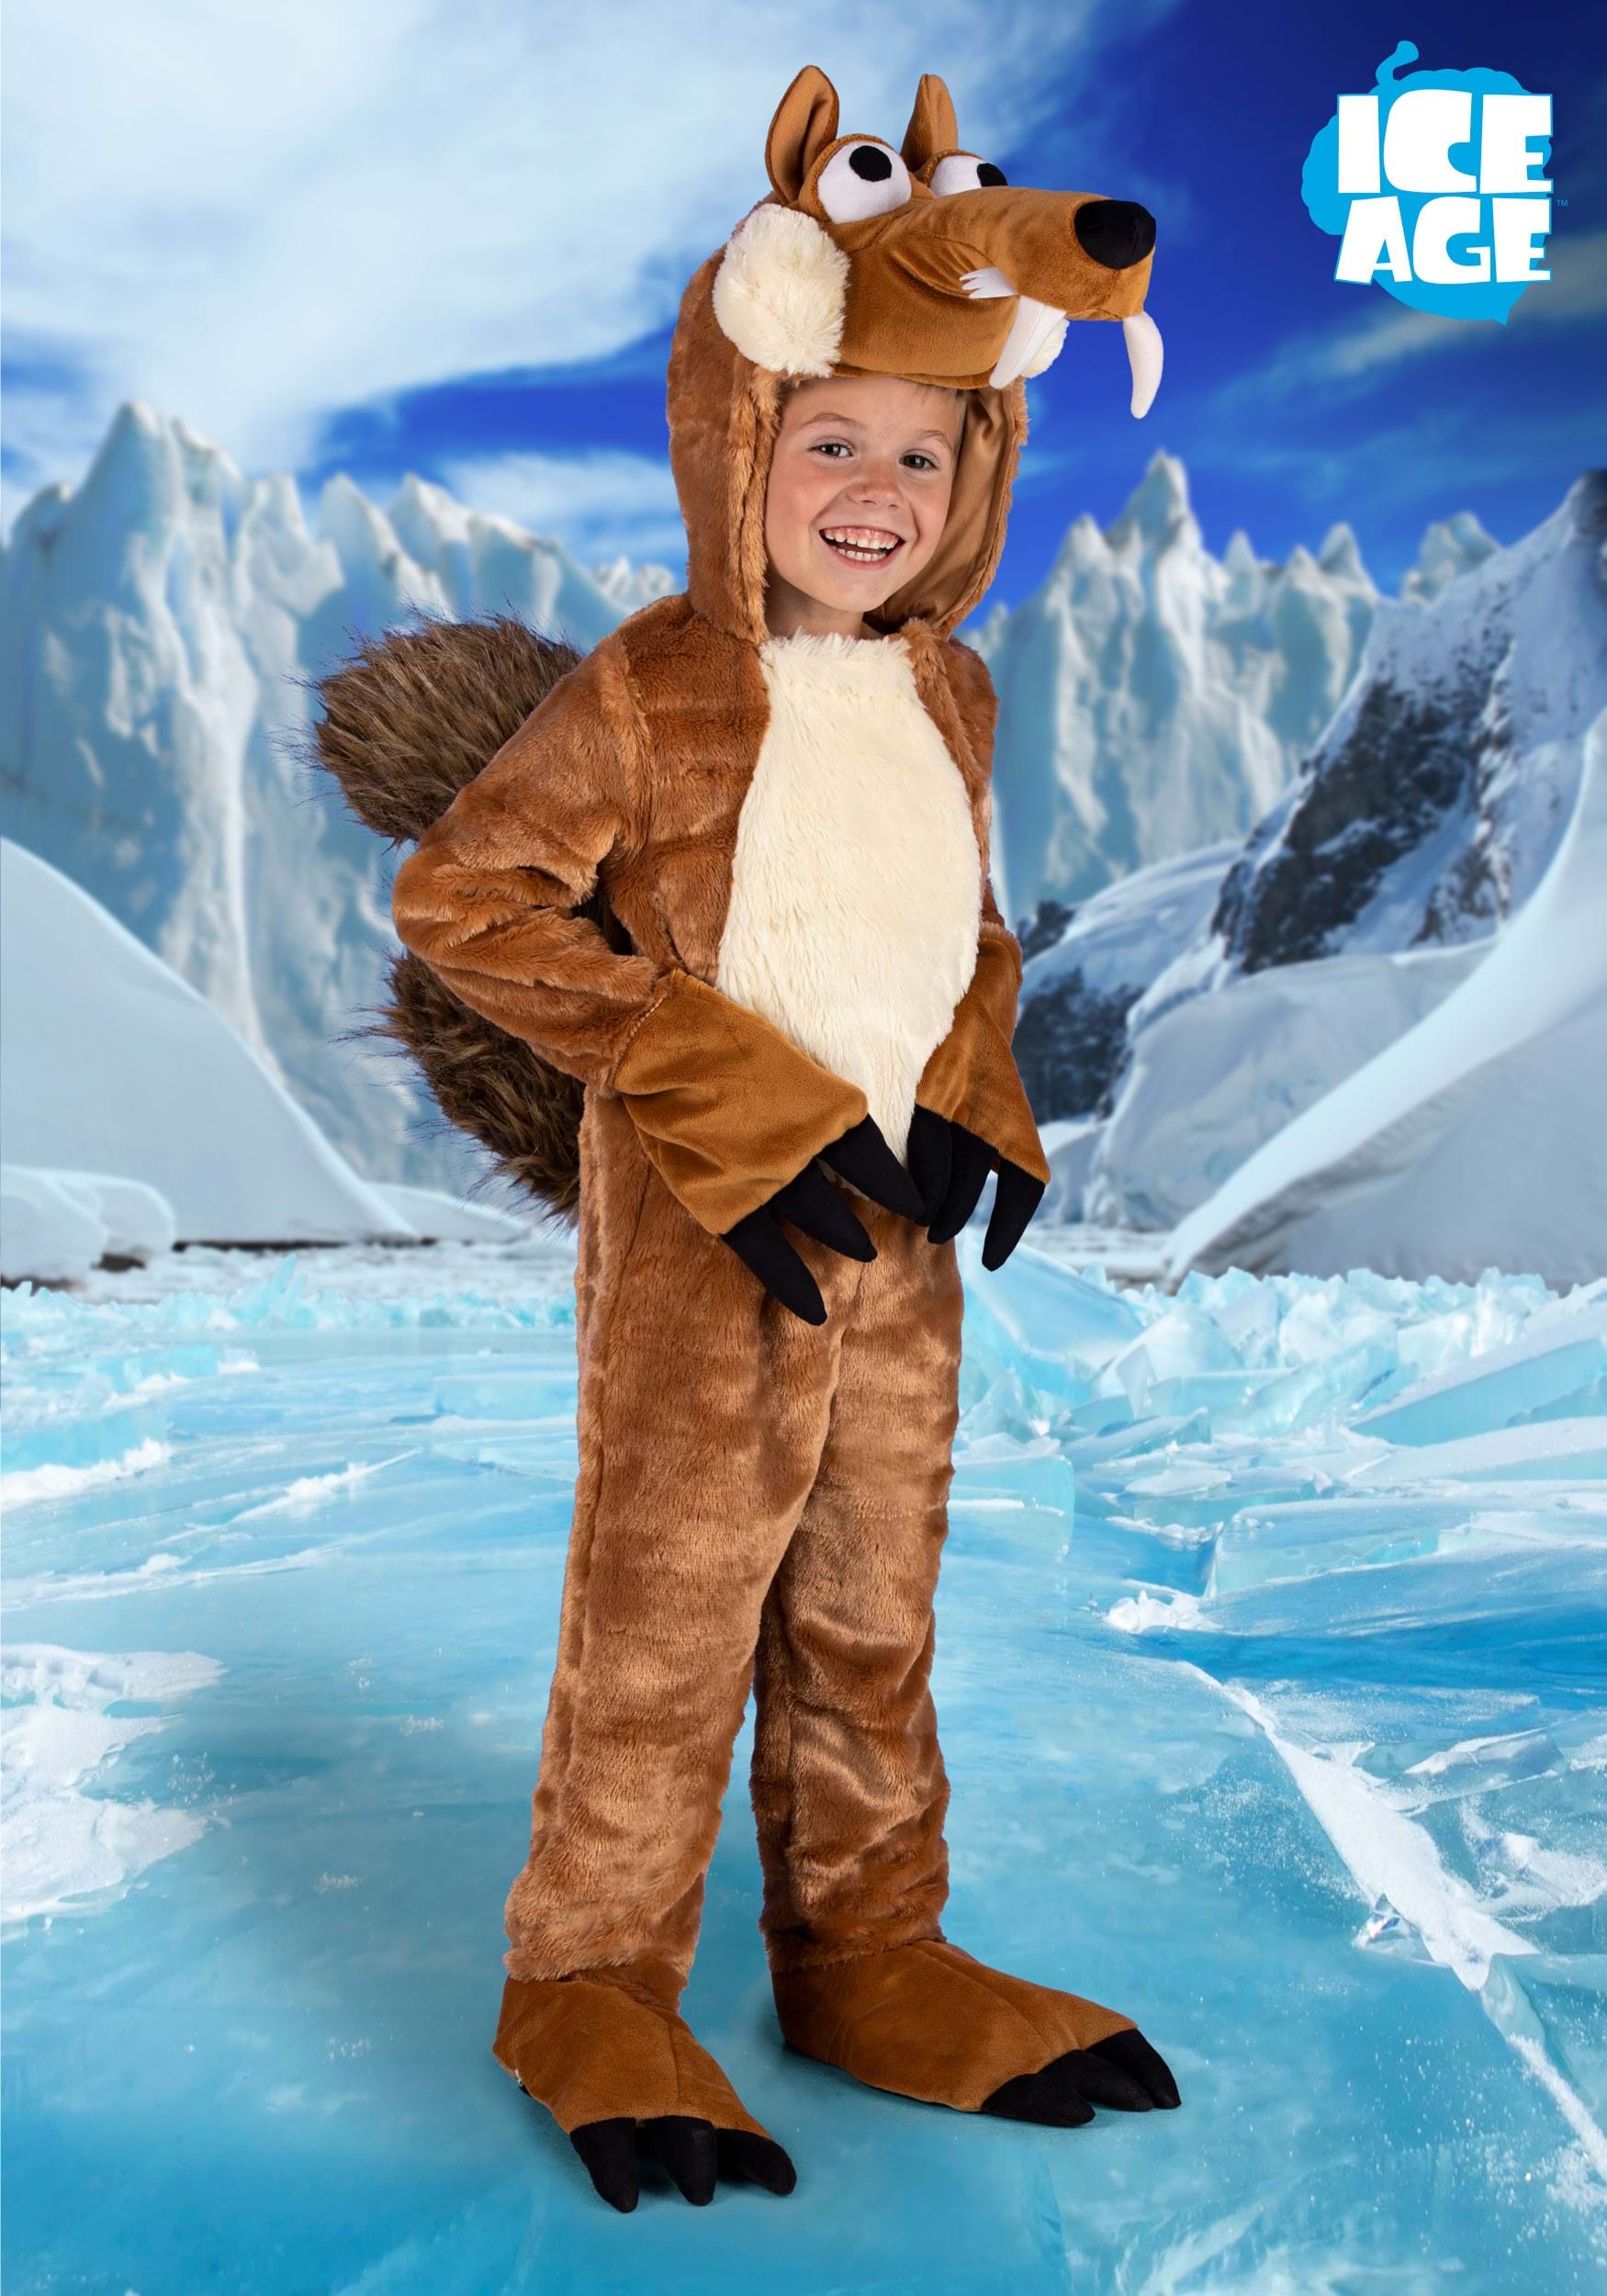 Manners The trail Pef Ice Age Toddler Scrat Costume